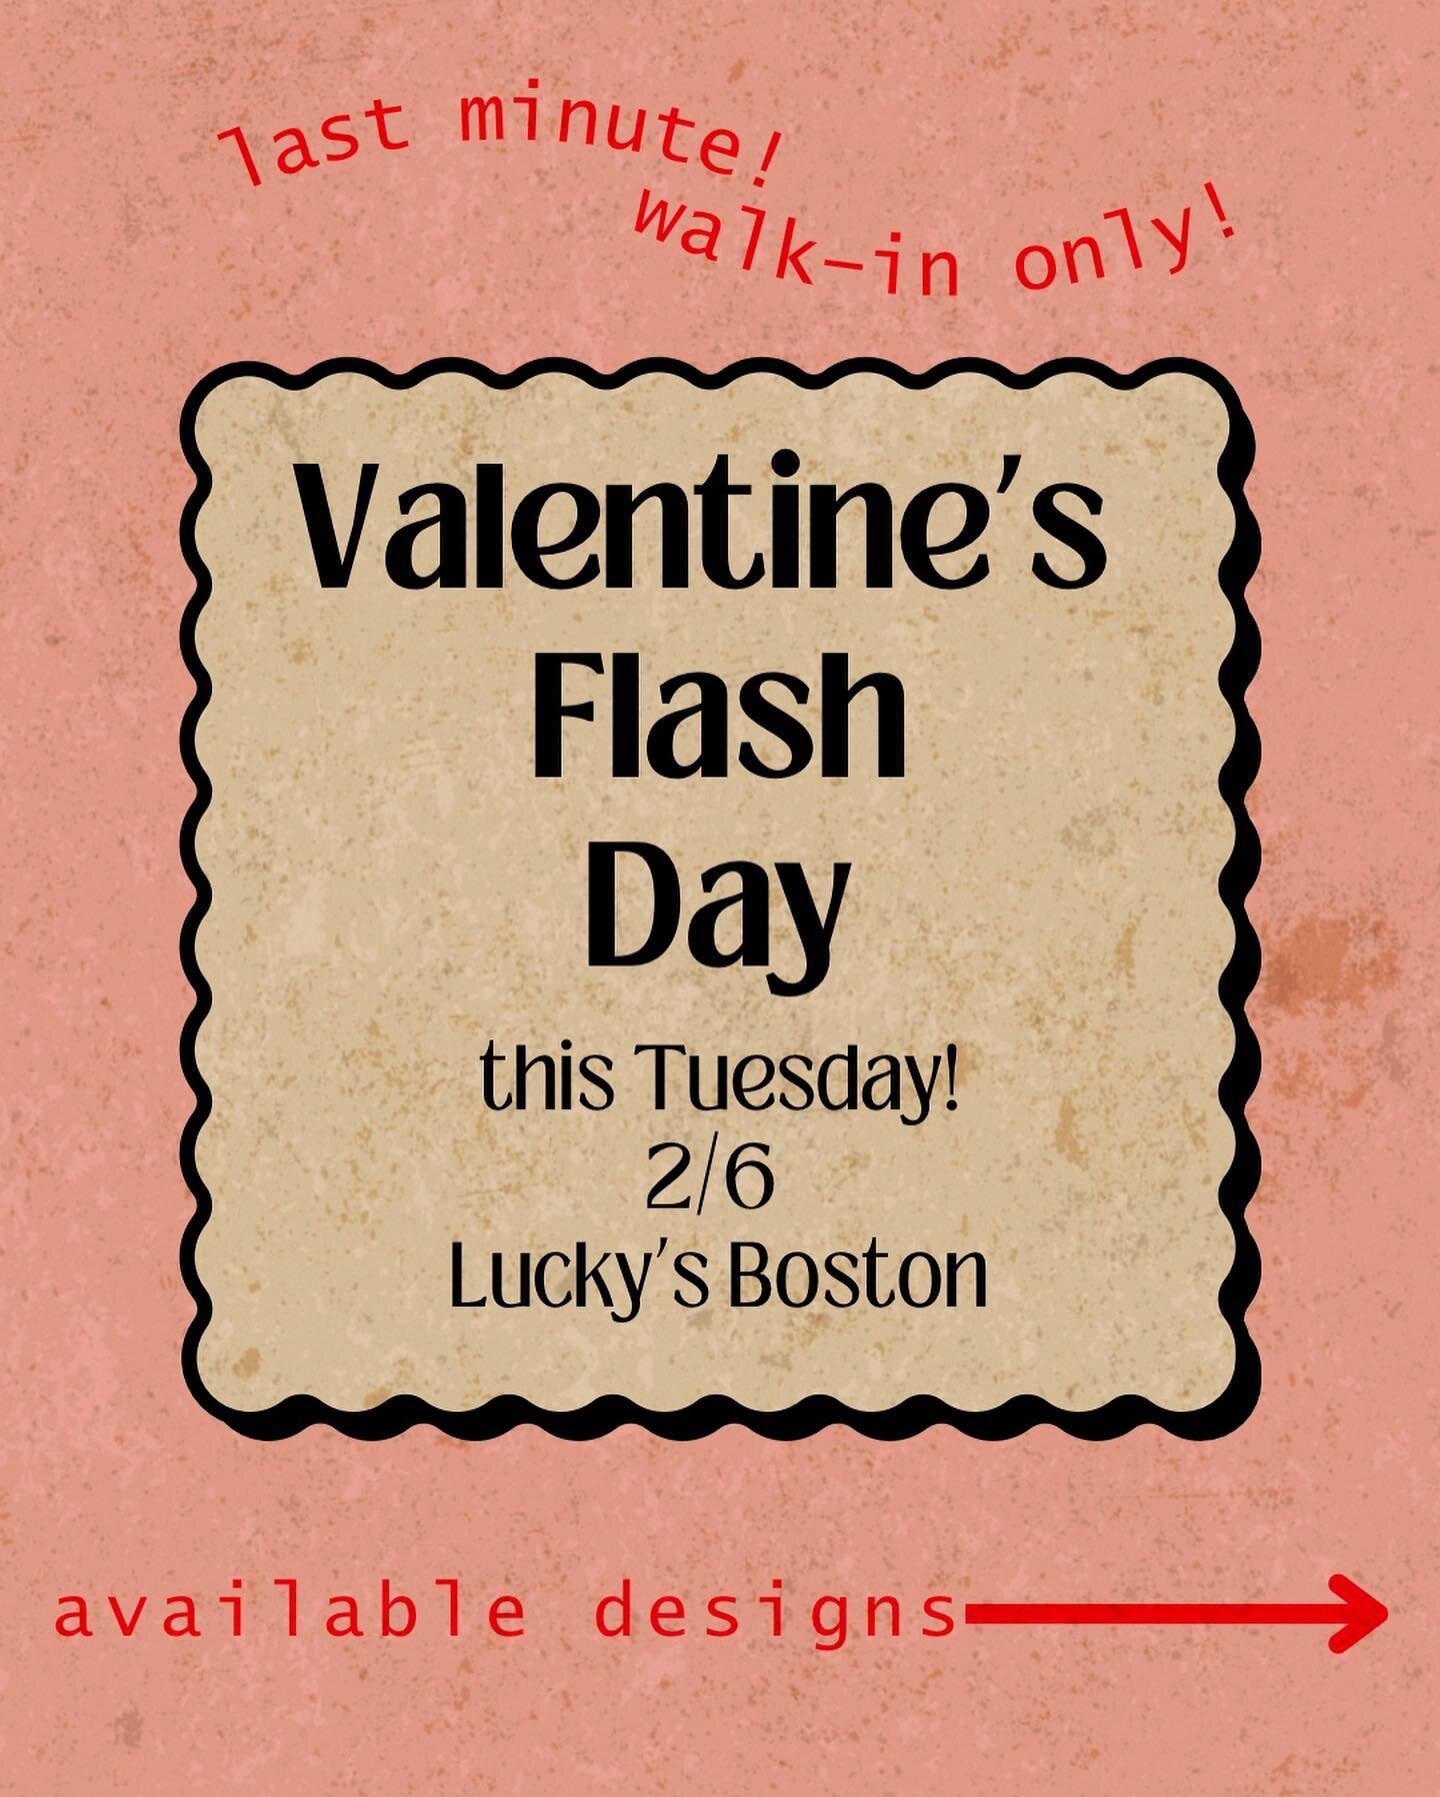 I&rsquo;m doing a last minute Valentine&rsquo;s flash day this Tuesday starting at noon! Walk-in only, space is limited. Blackwork and dotwork designs. See you there! &hearts;️&hearts;️&hearts;️